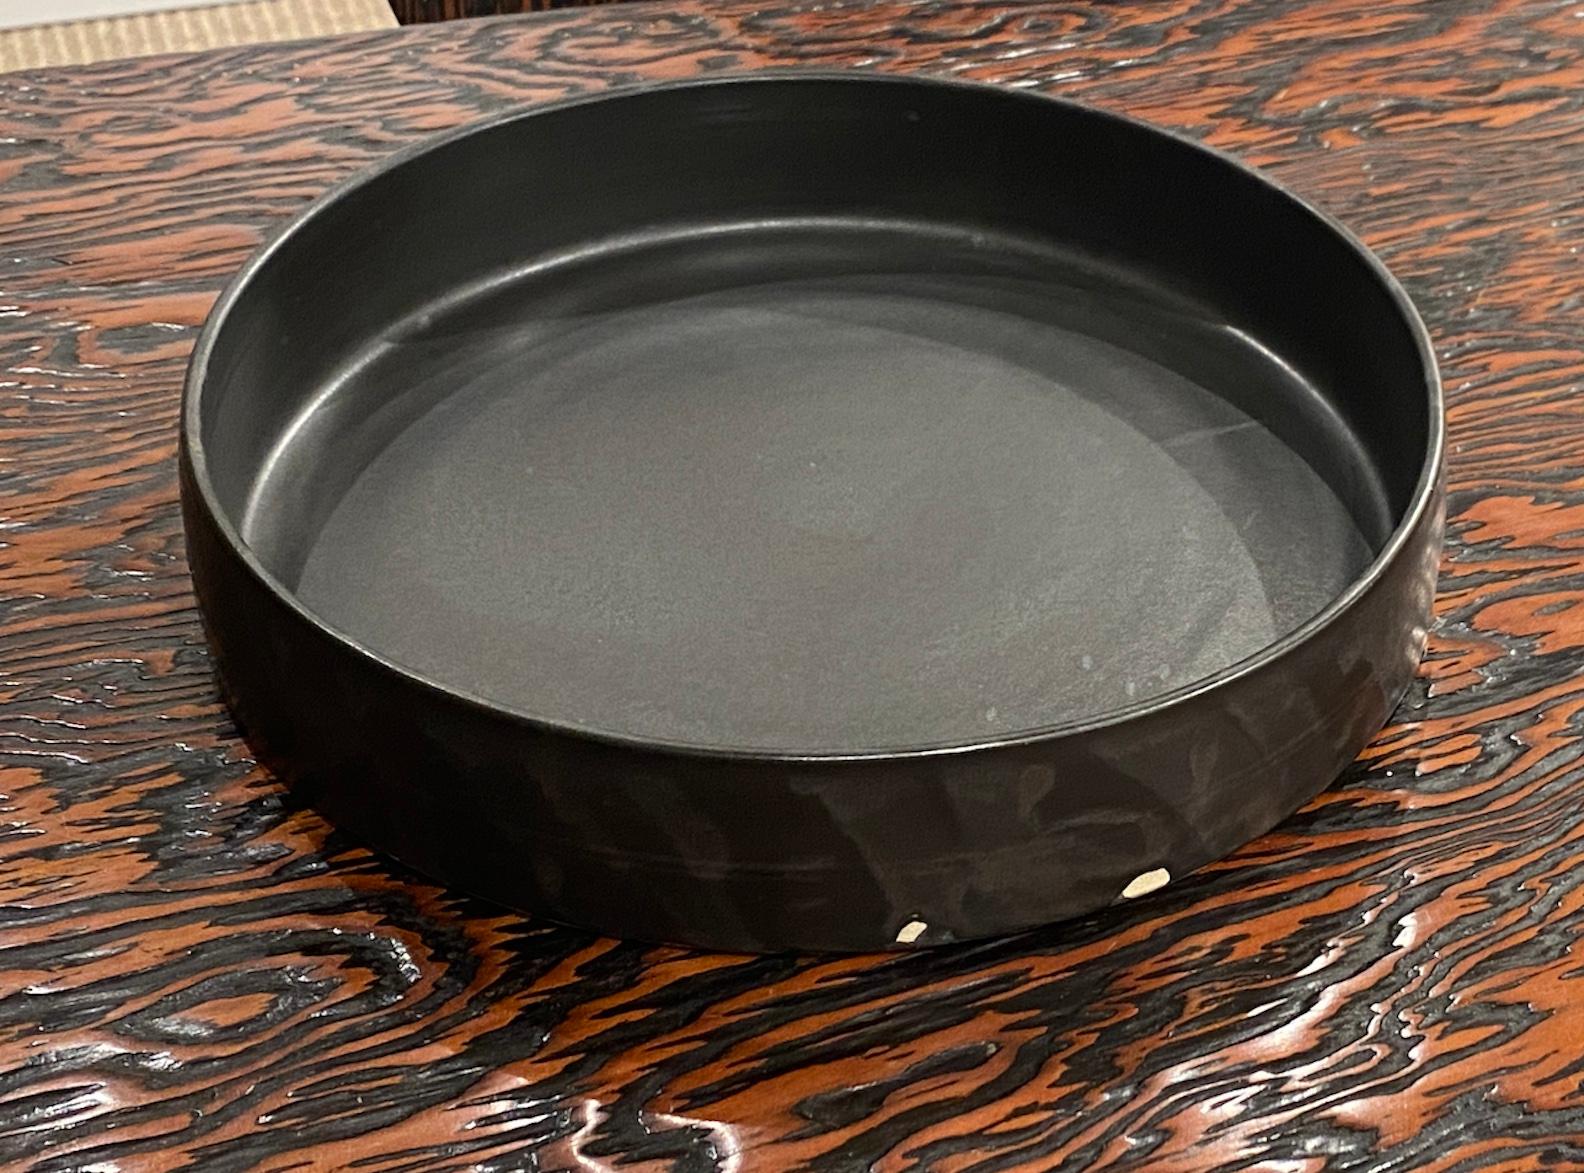 This hand-crafted black glazed ceramic platter is a unique piece by a British ceramic artist from the Cotswolds. 